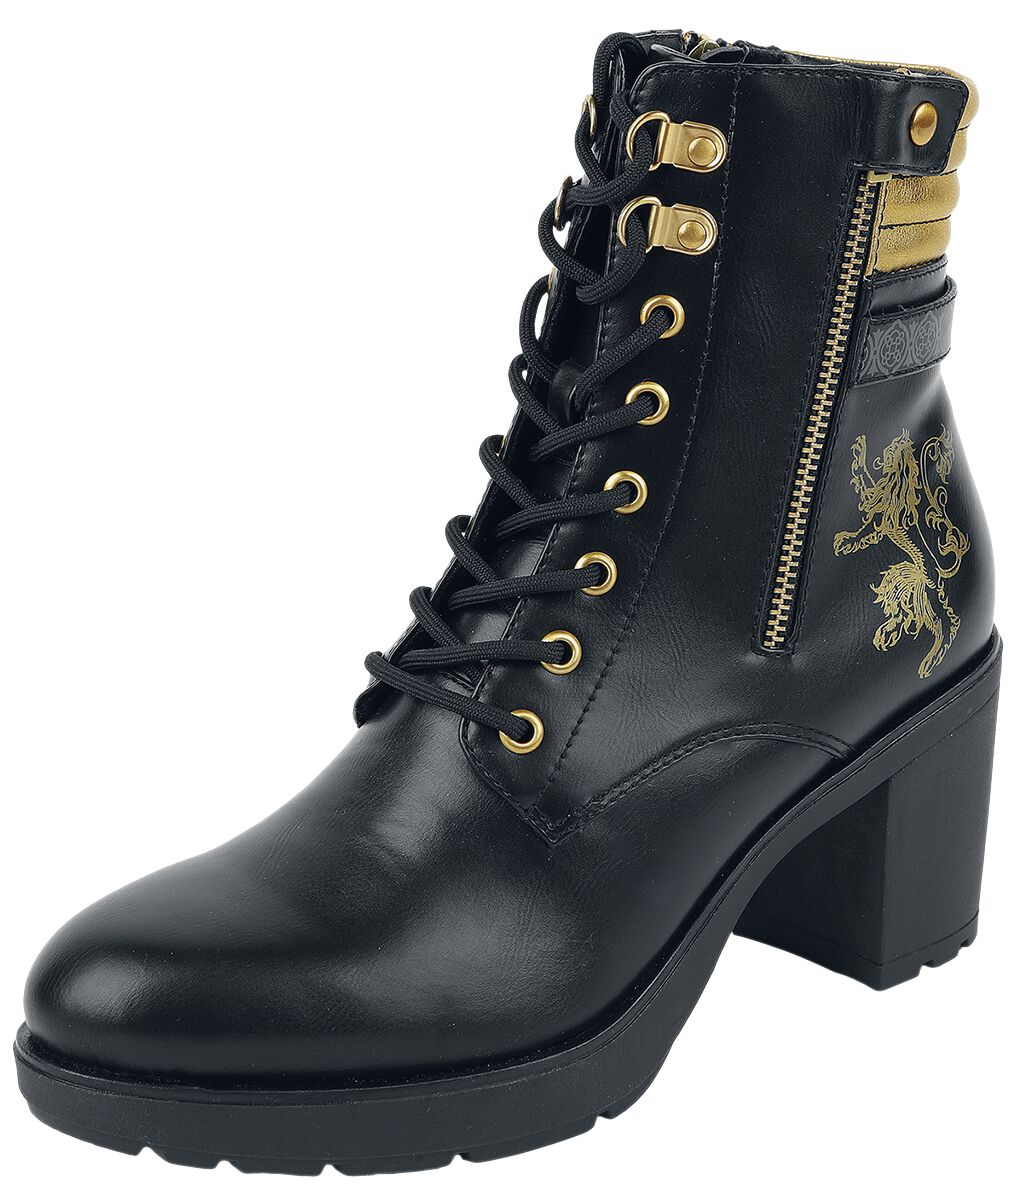 Game of Thrones Lannister Laced Boots black